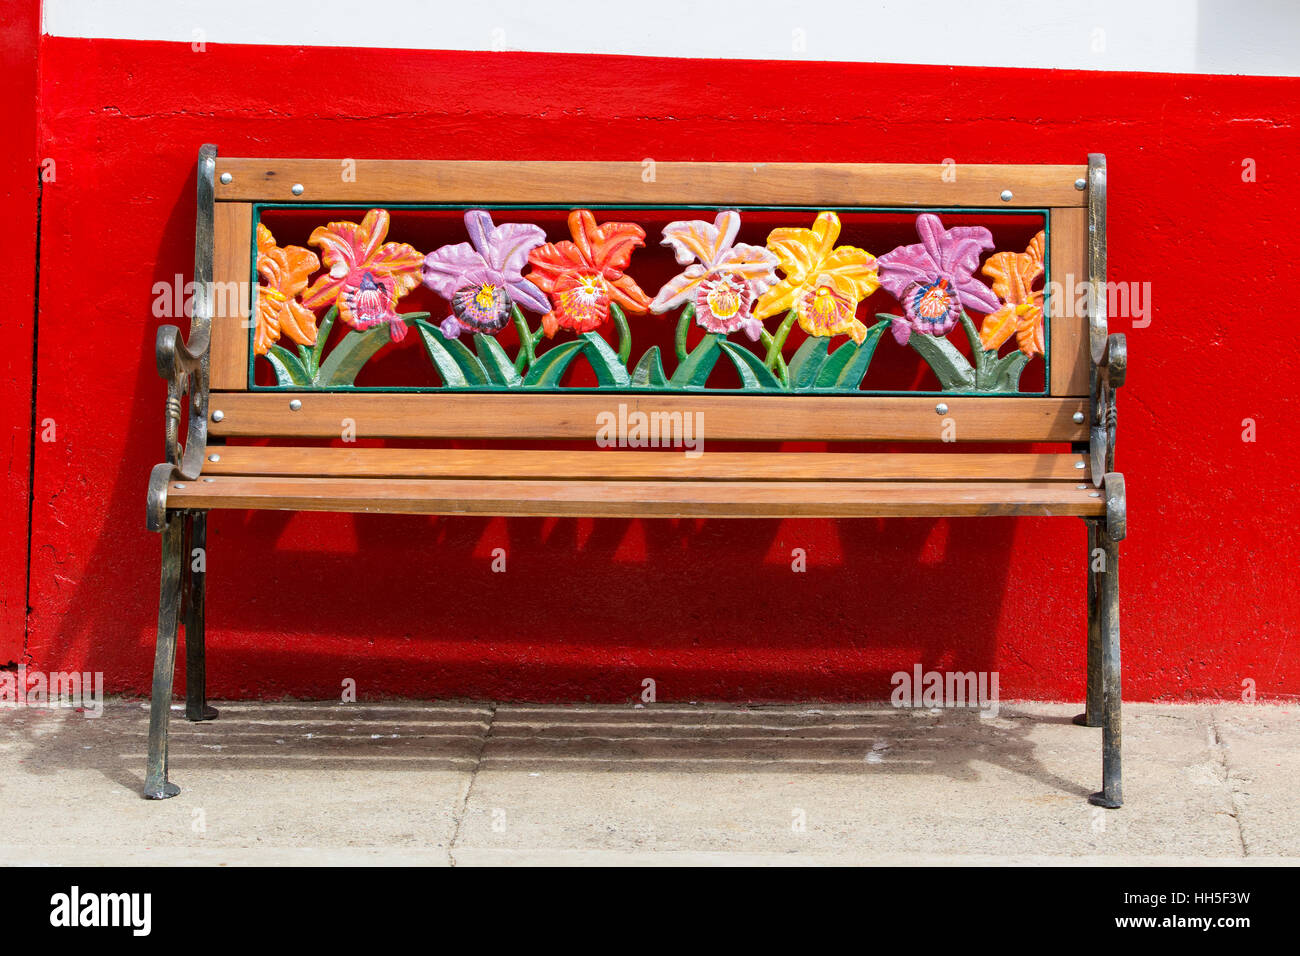 Colorful bench with floral motives against a red wall, El Jardin Colombia Stock Photo